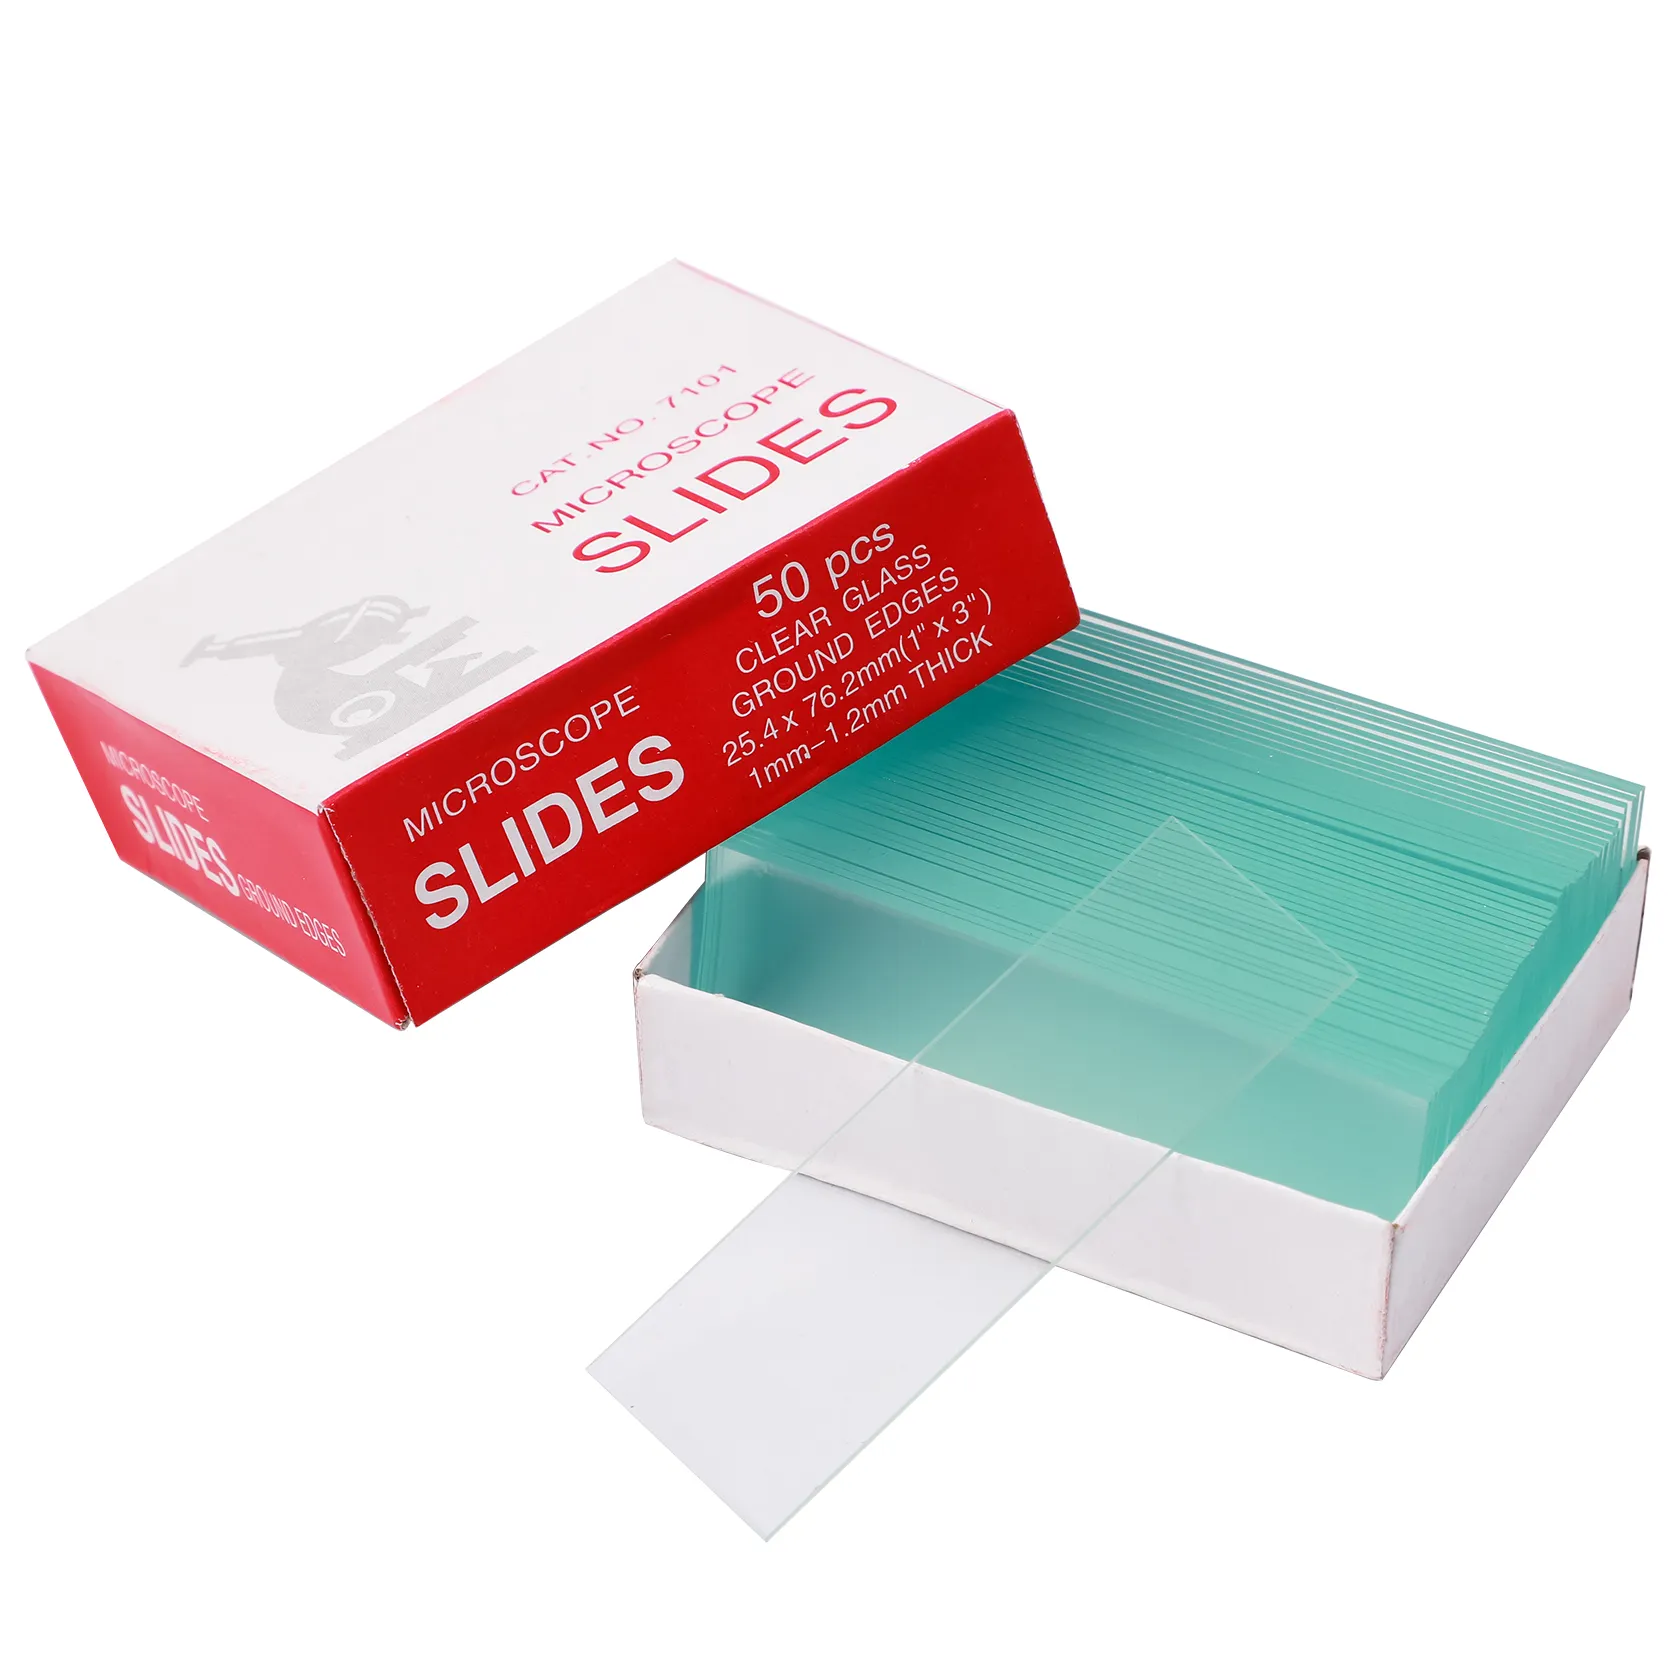 Laboratory Microscope Slides Factory in China